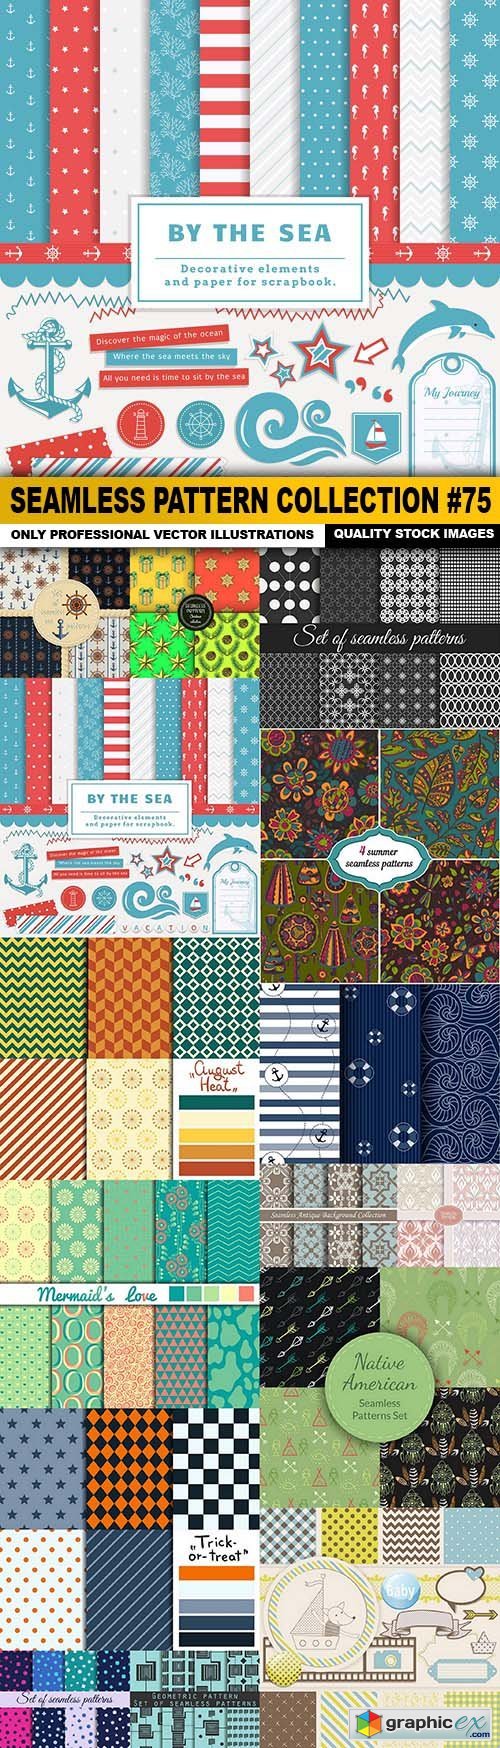 Seamless Pattern Collection #75